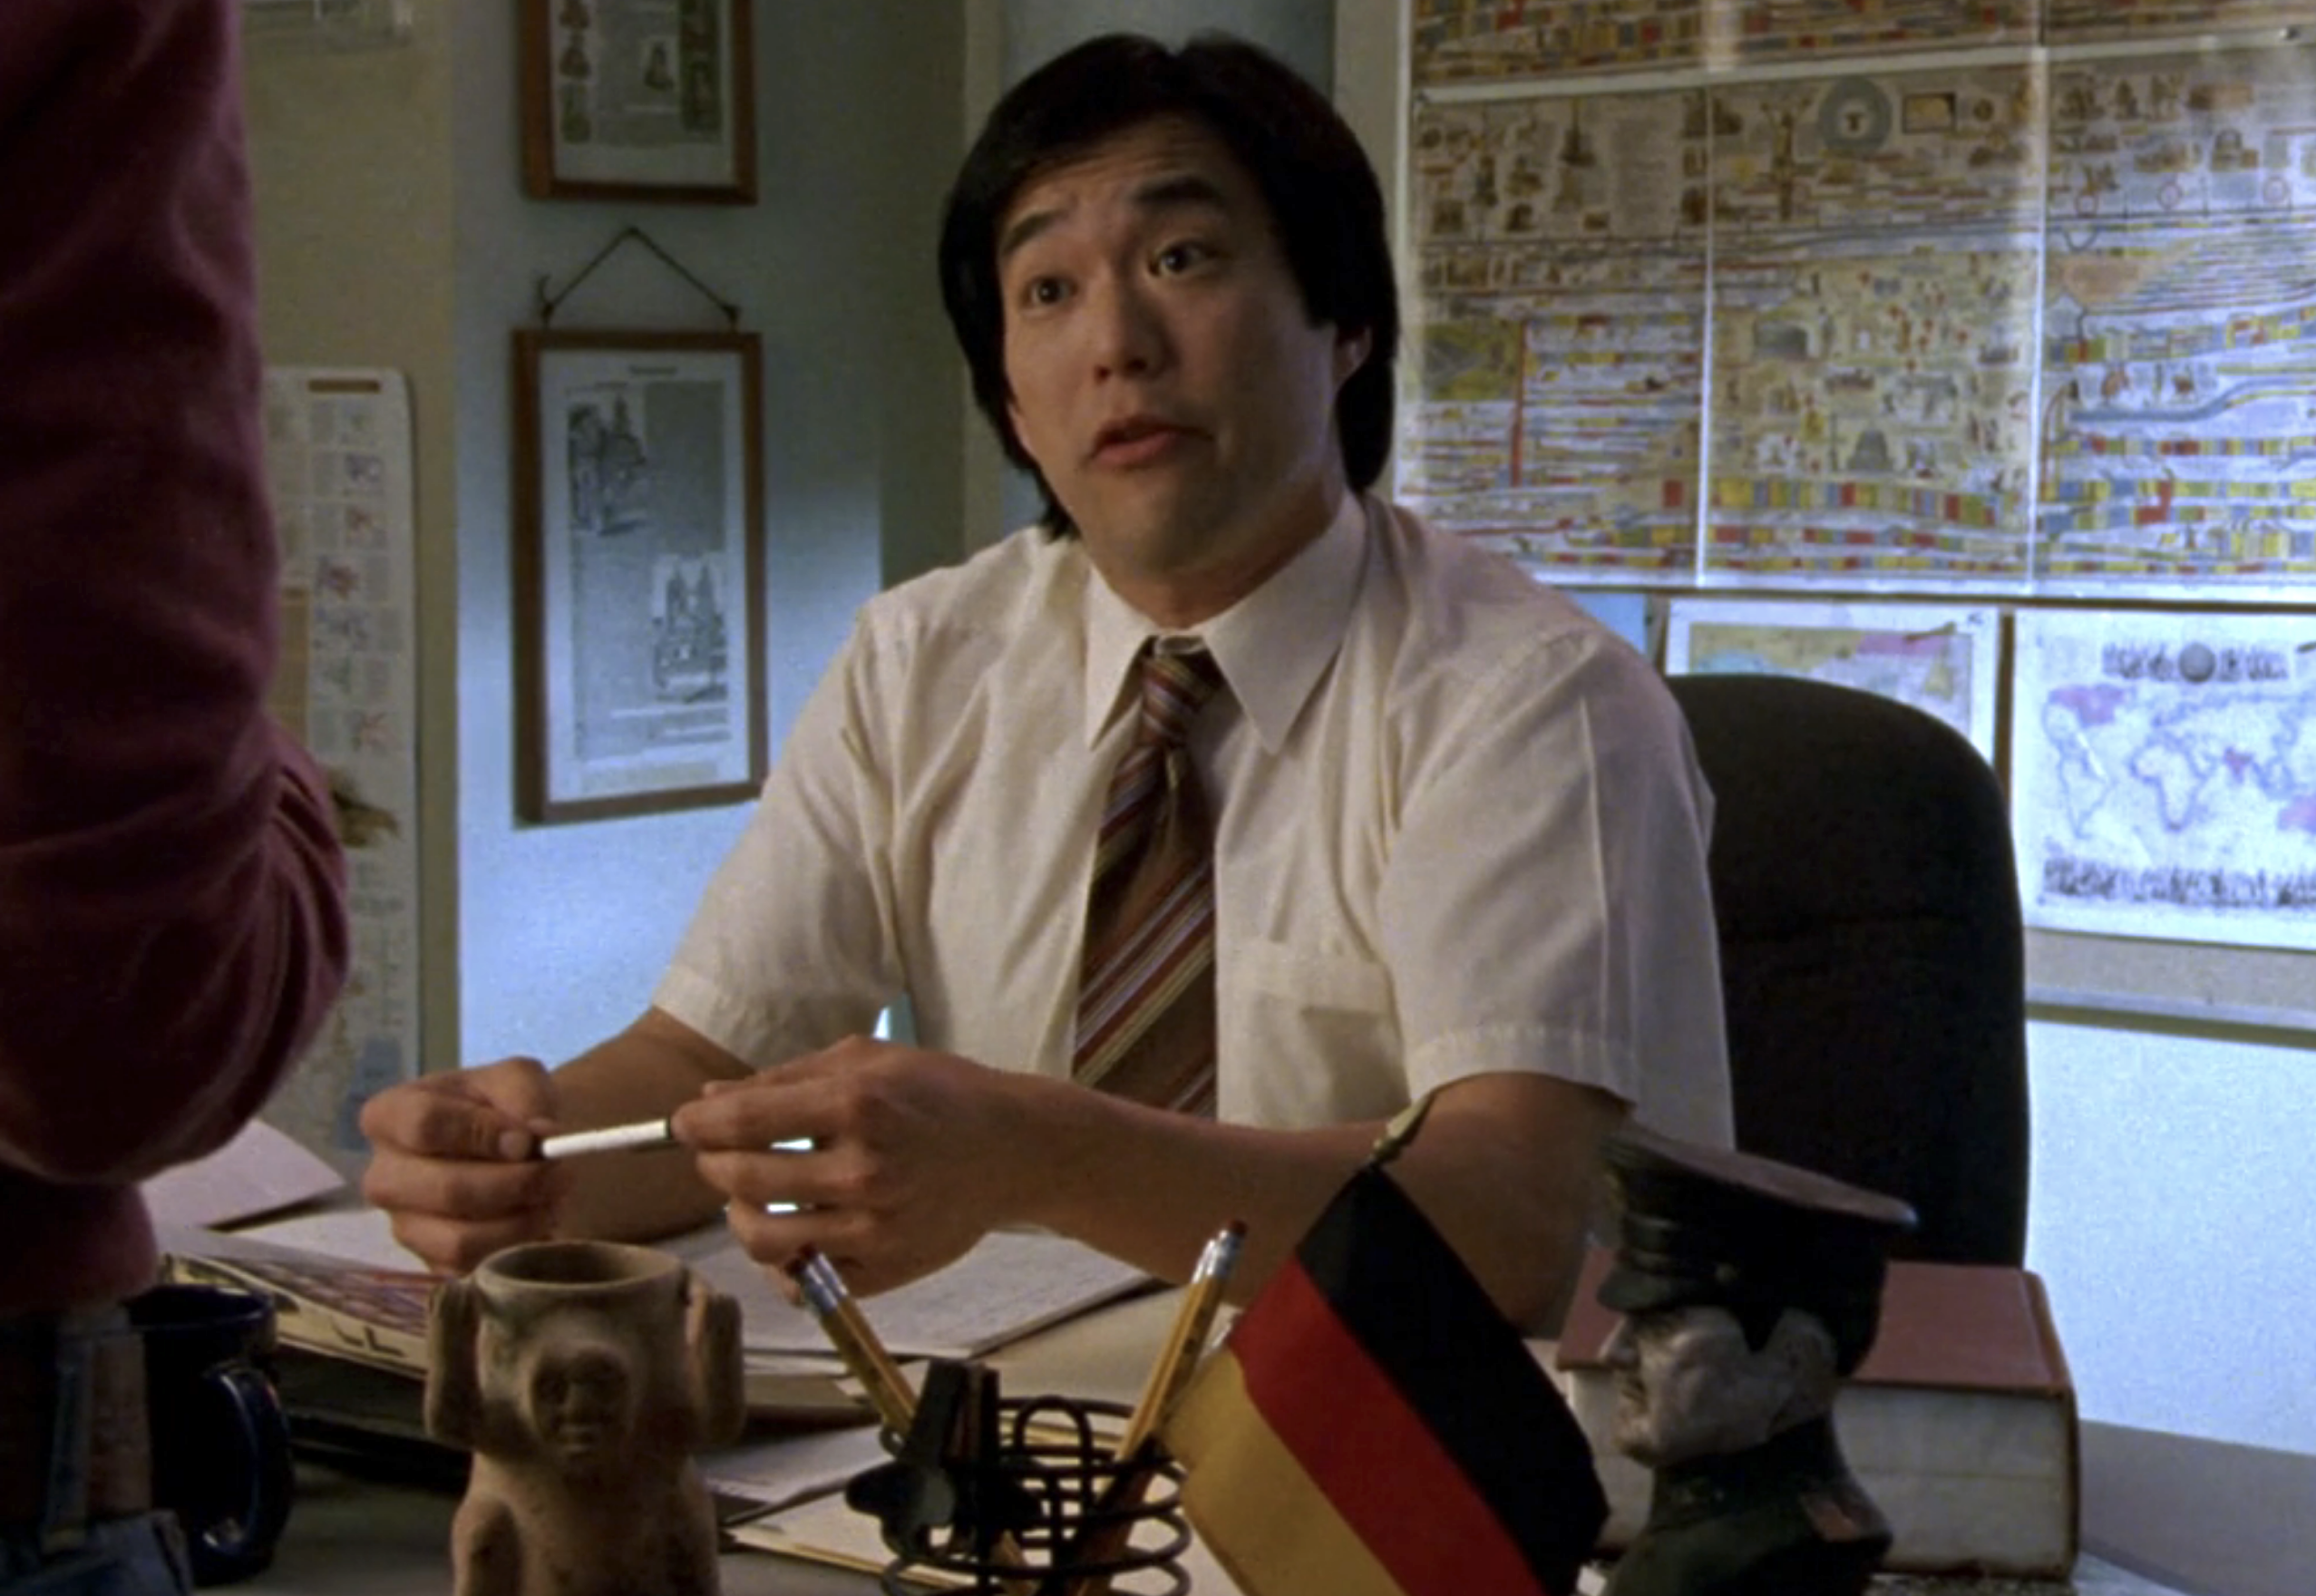 Screenshot of S1E20 of Veronica Mars. Mr. Wu is sitting at the head of the class at a teacher's desk talking to Veronica who is off screen. Sitting on the desk is a German flag and a small busy of a soldier.